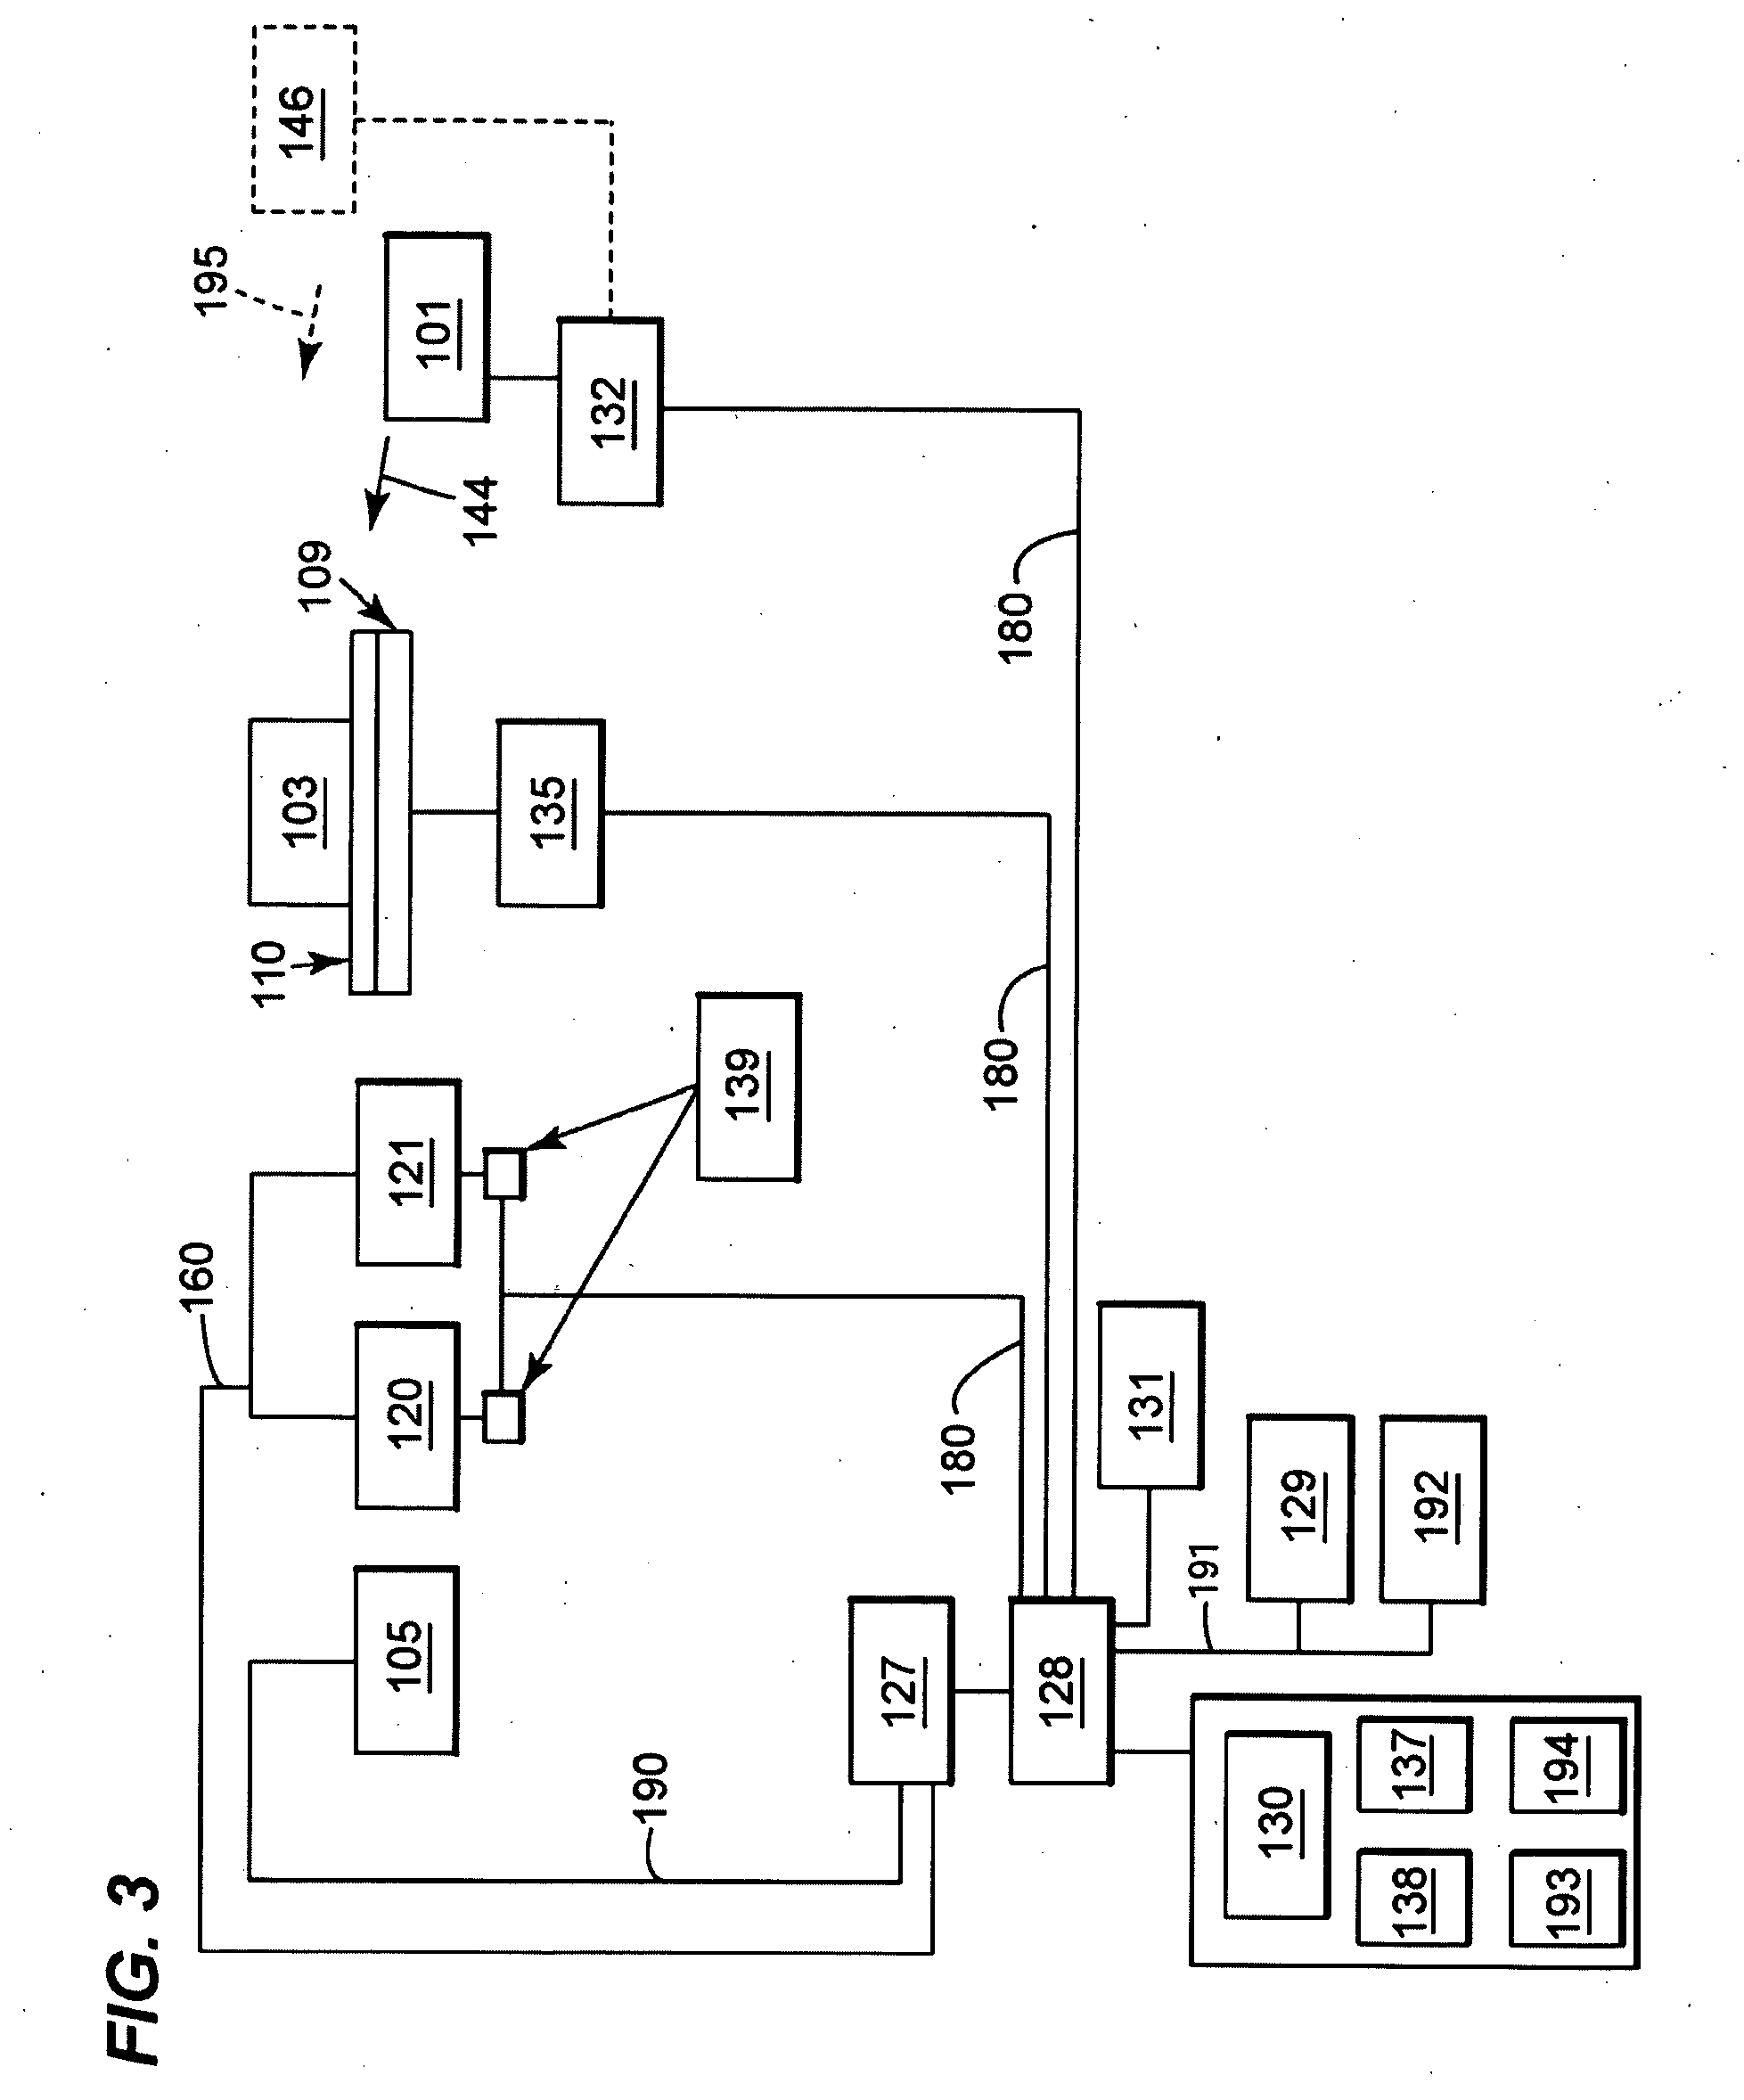 System and methods for detecting concealed nuclear material in cargo